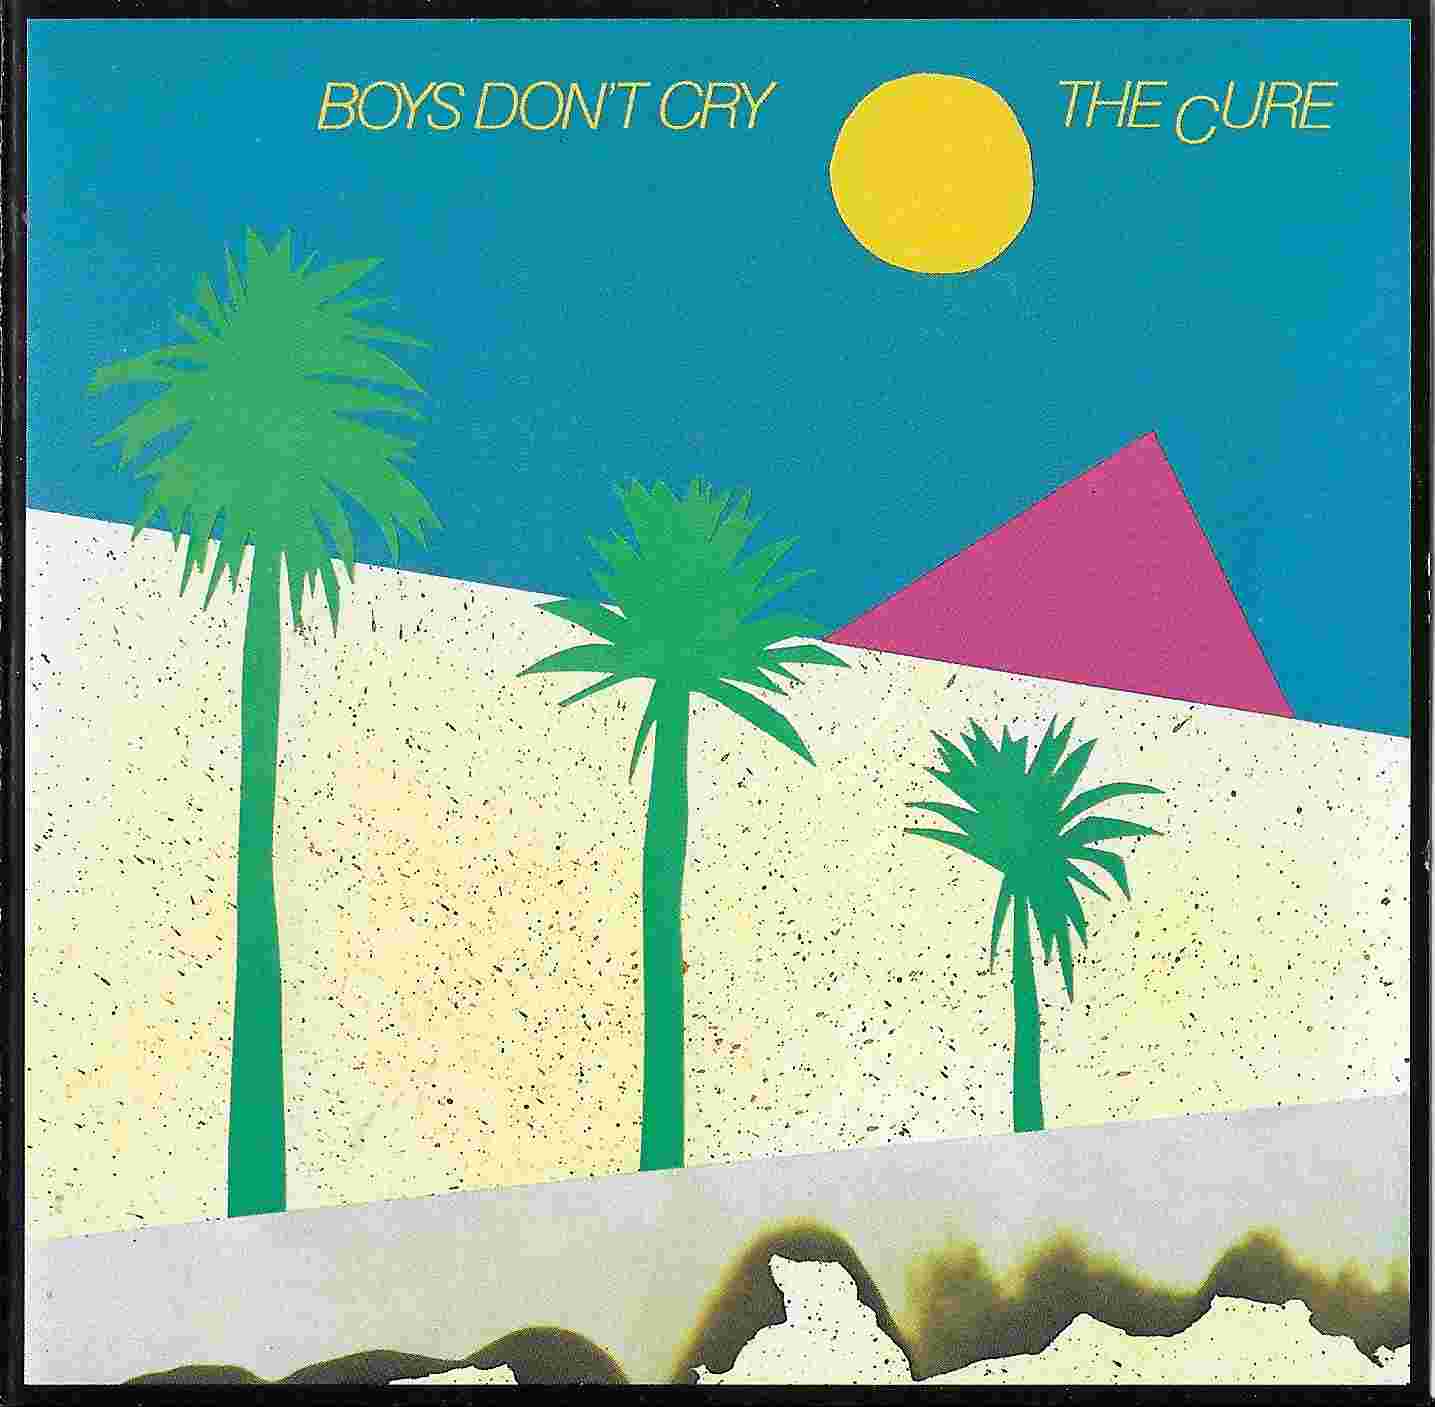 Picture of Boys don't cry by artist The Cure 